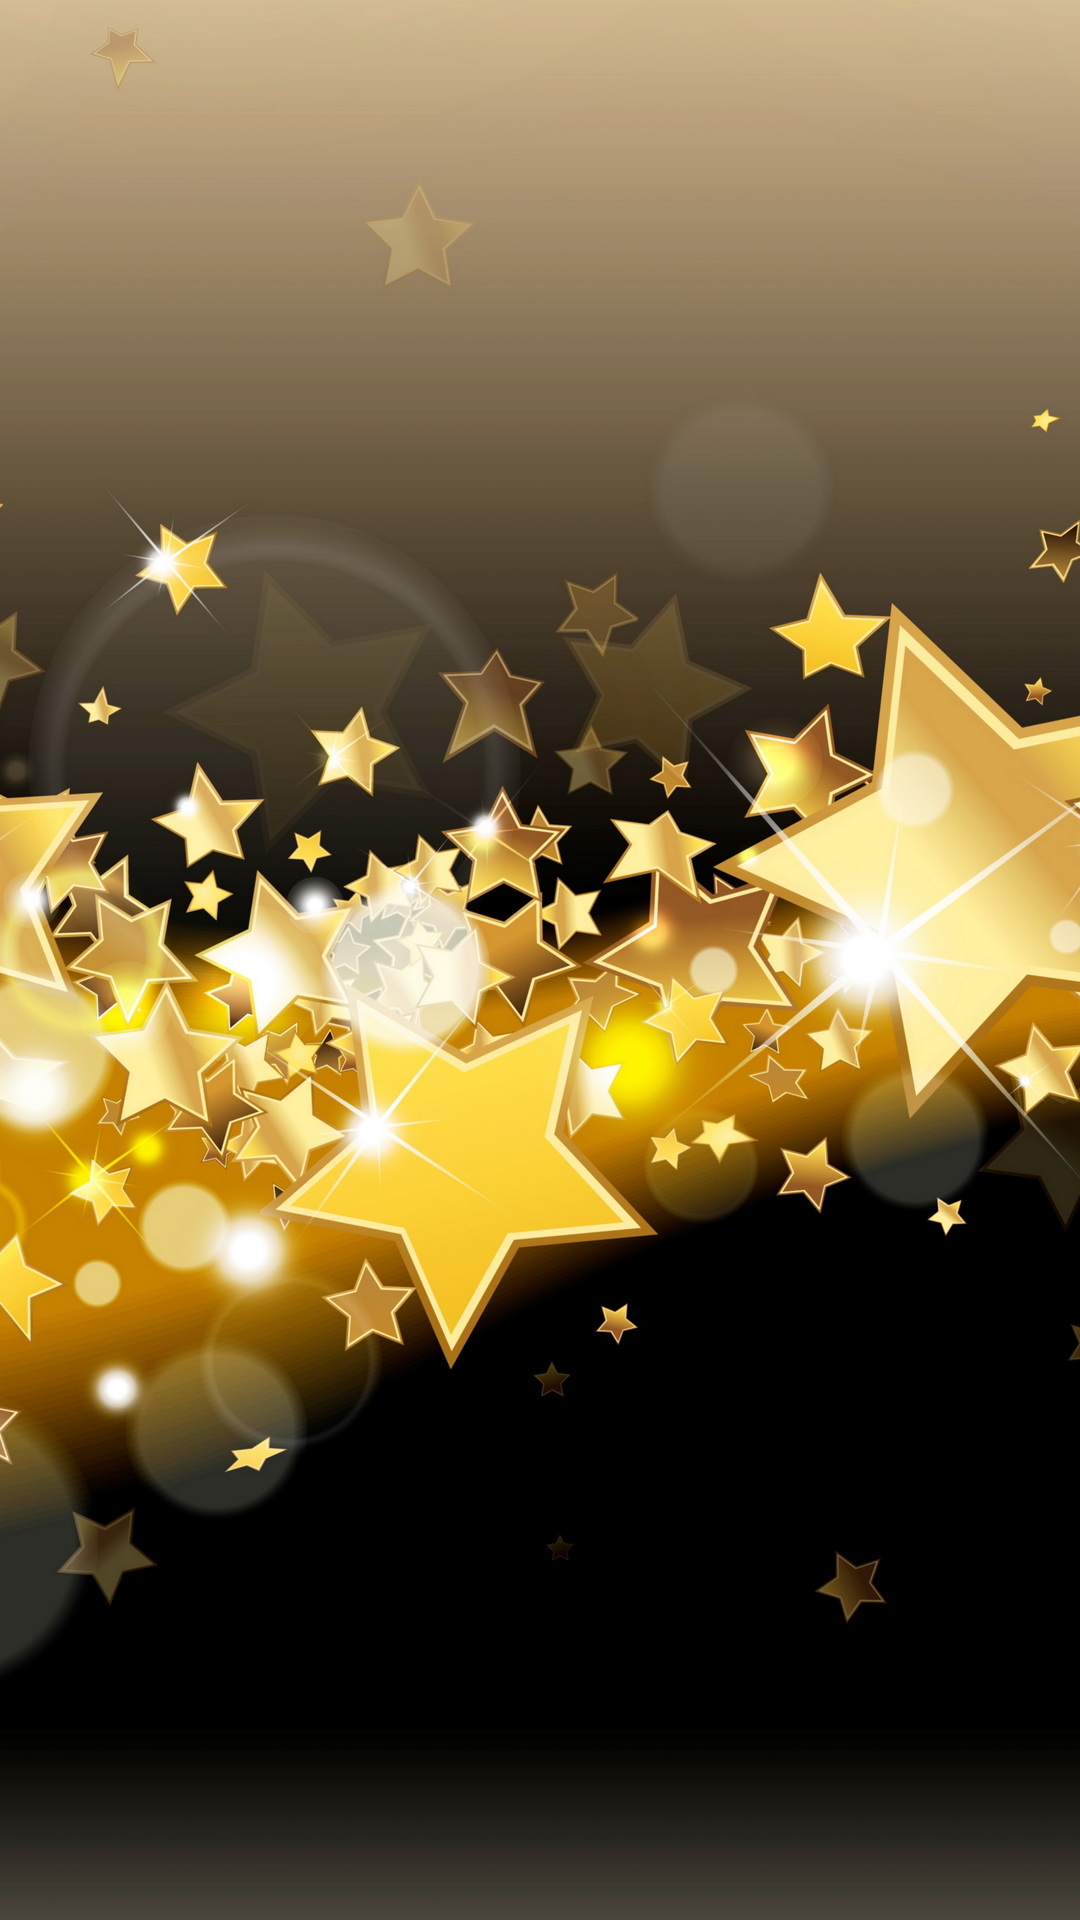 Stars Wallpaper and HD Background free download on PicGaGa